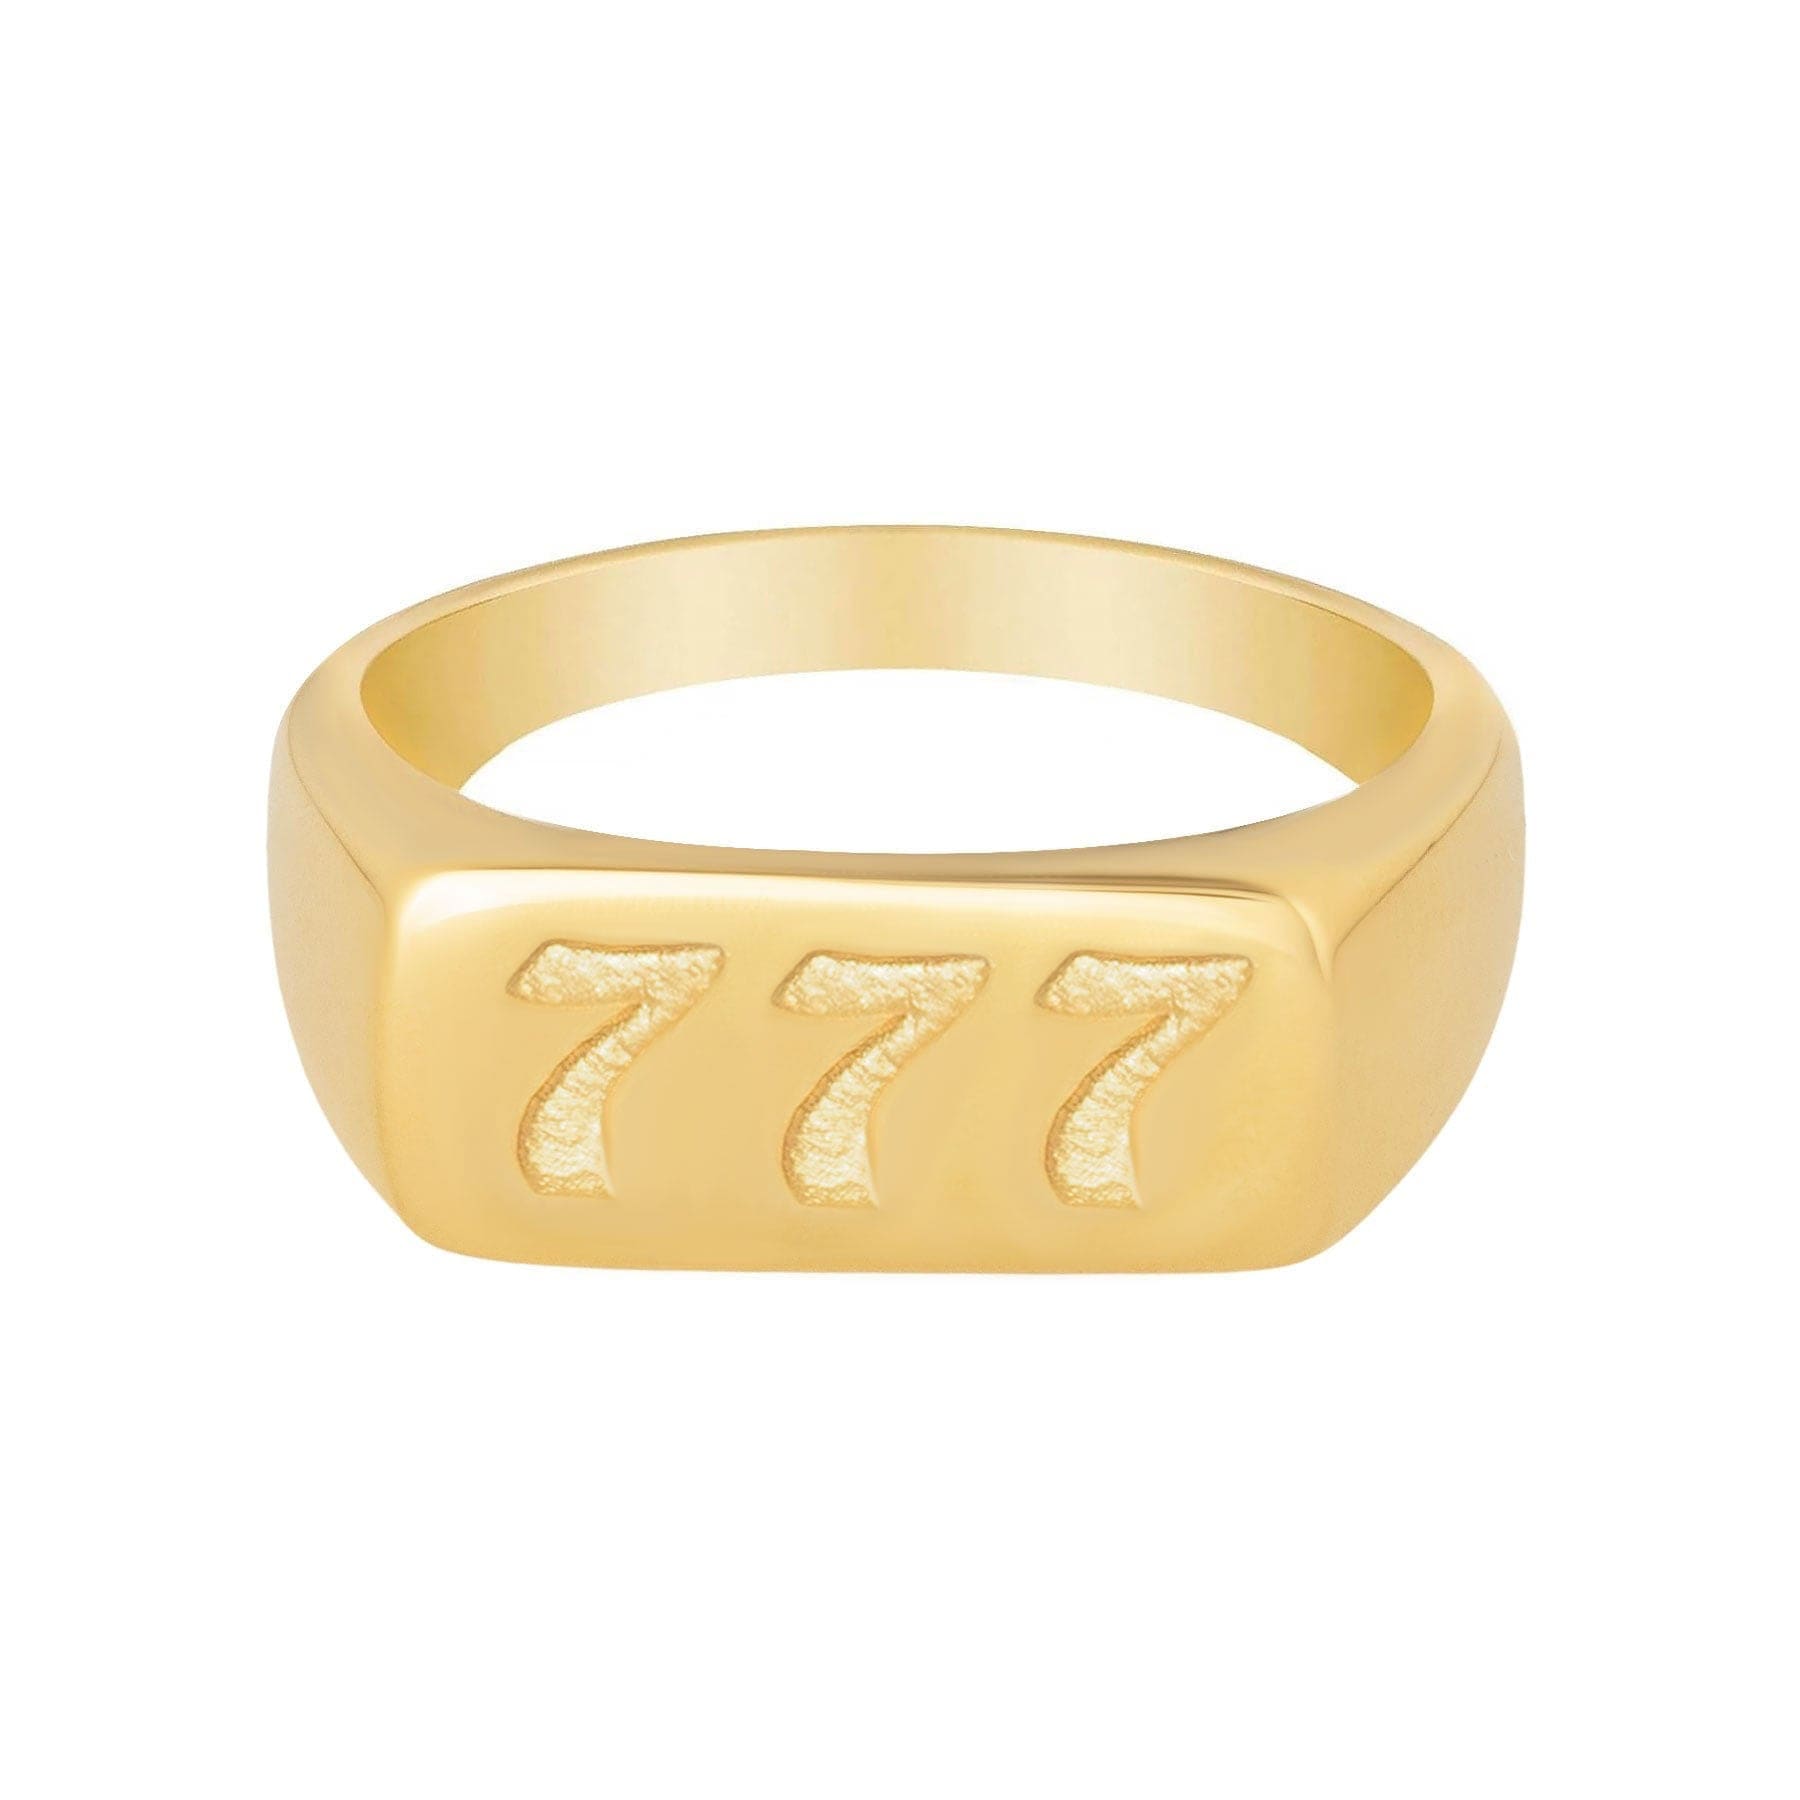 BohoMoon Stainless Steel Angel Numbers Ring Gold / 777 / US 6 / UK L / EUR 51 (small)